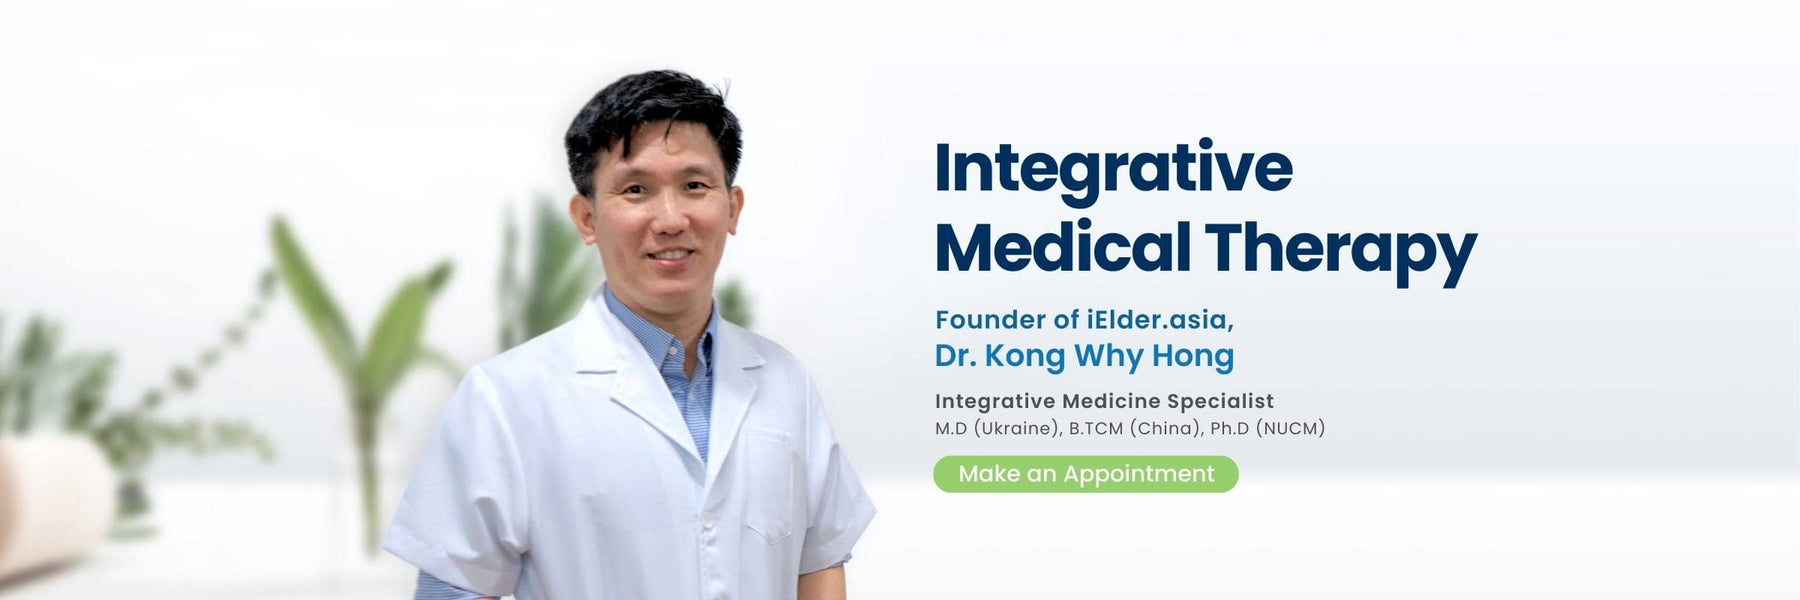 Make An Appointment with Dr Kong Why Hong